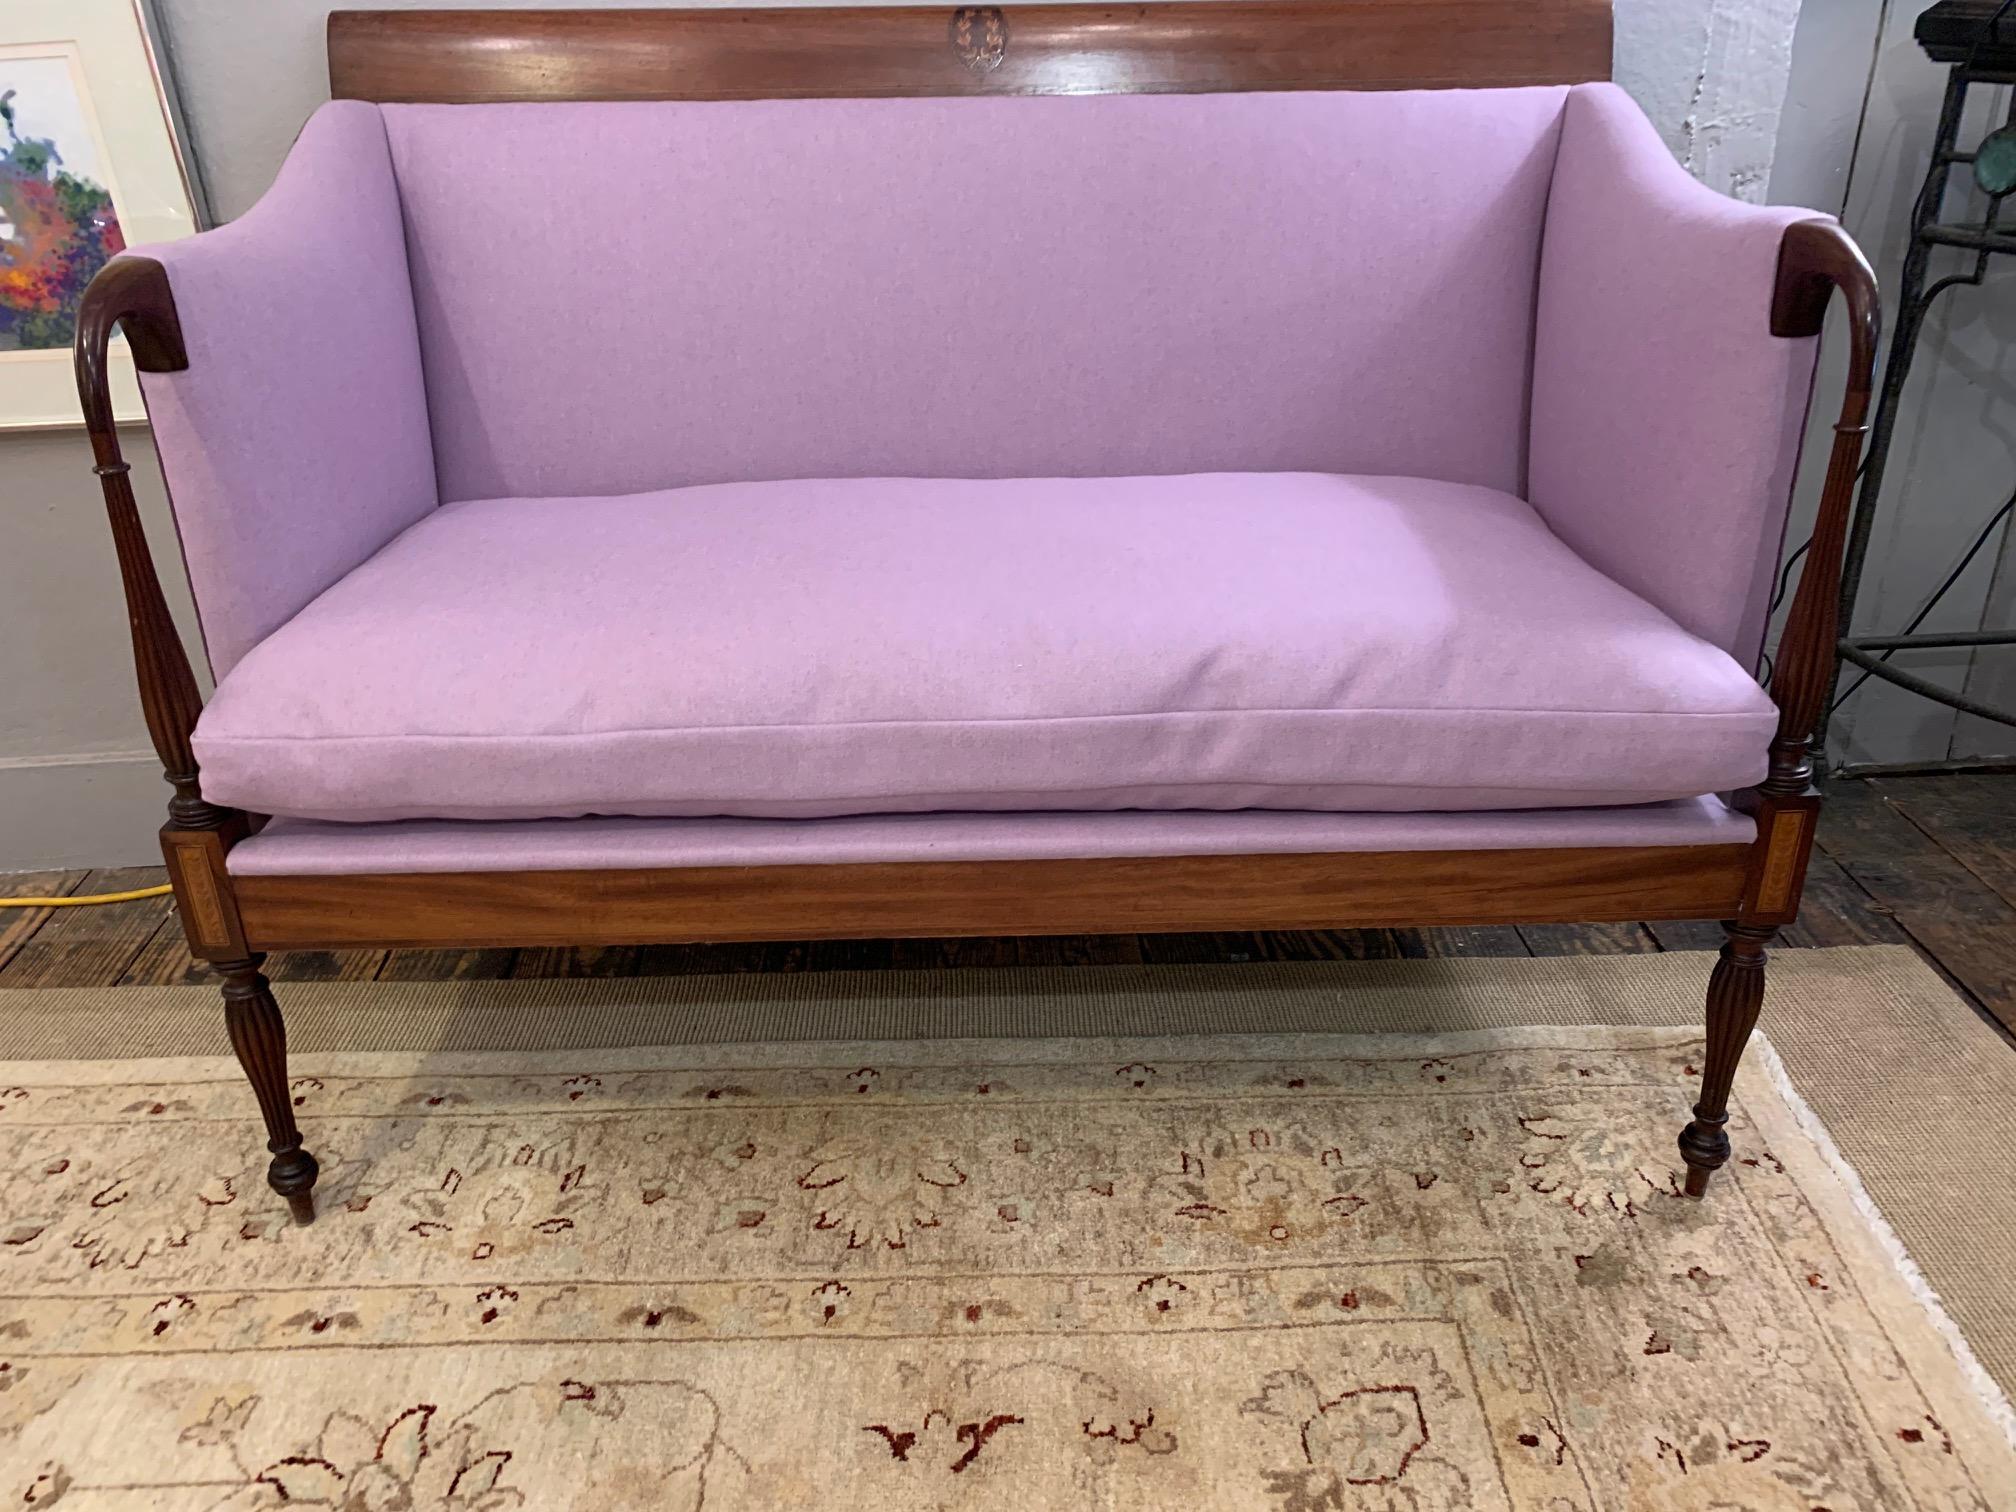 Upholstery Dreamy Federal Style Mahogany and Lavender Antique Settee Loveseat